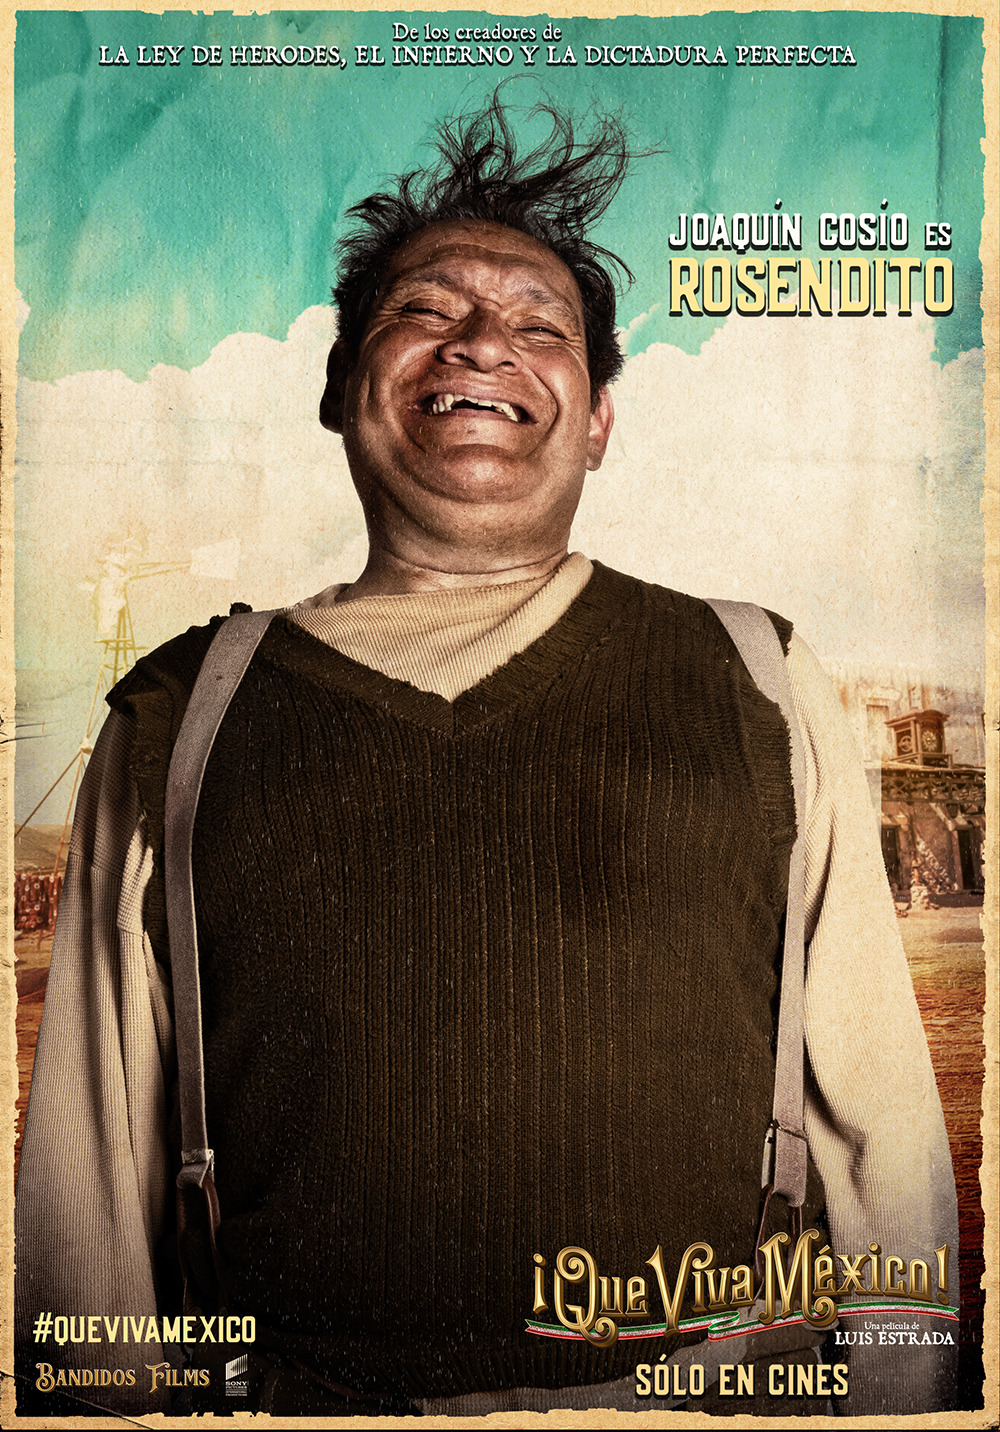 Extra Large Movie Poster Image for ¡Que viva México! (#26 of 27)